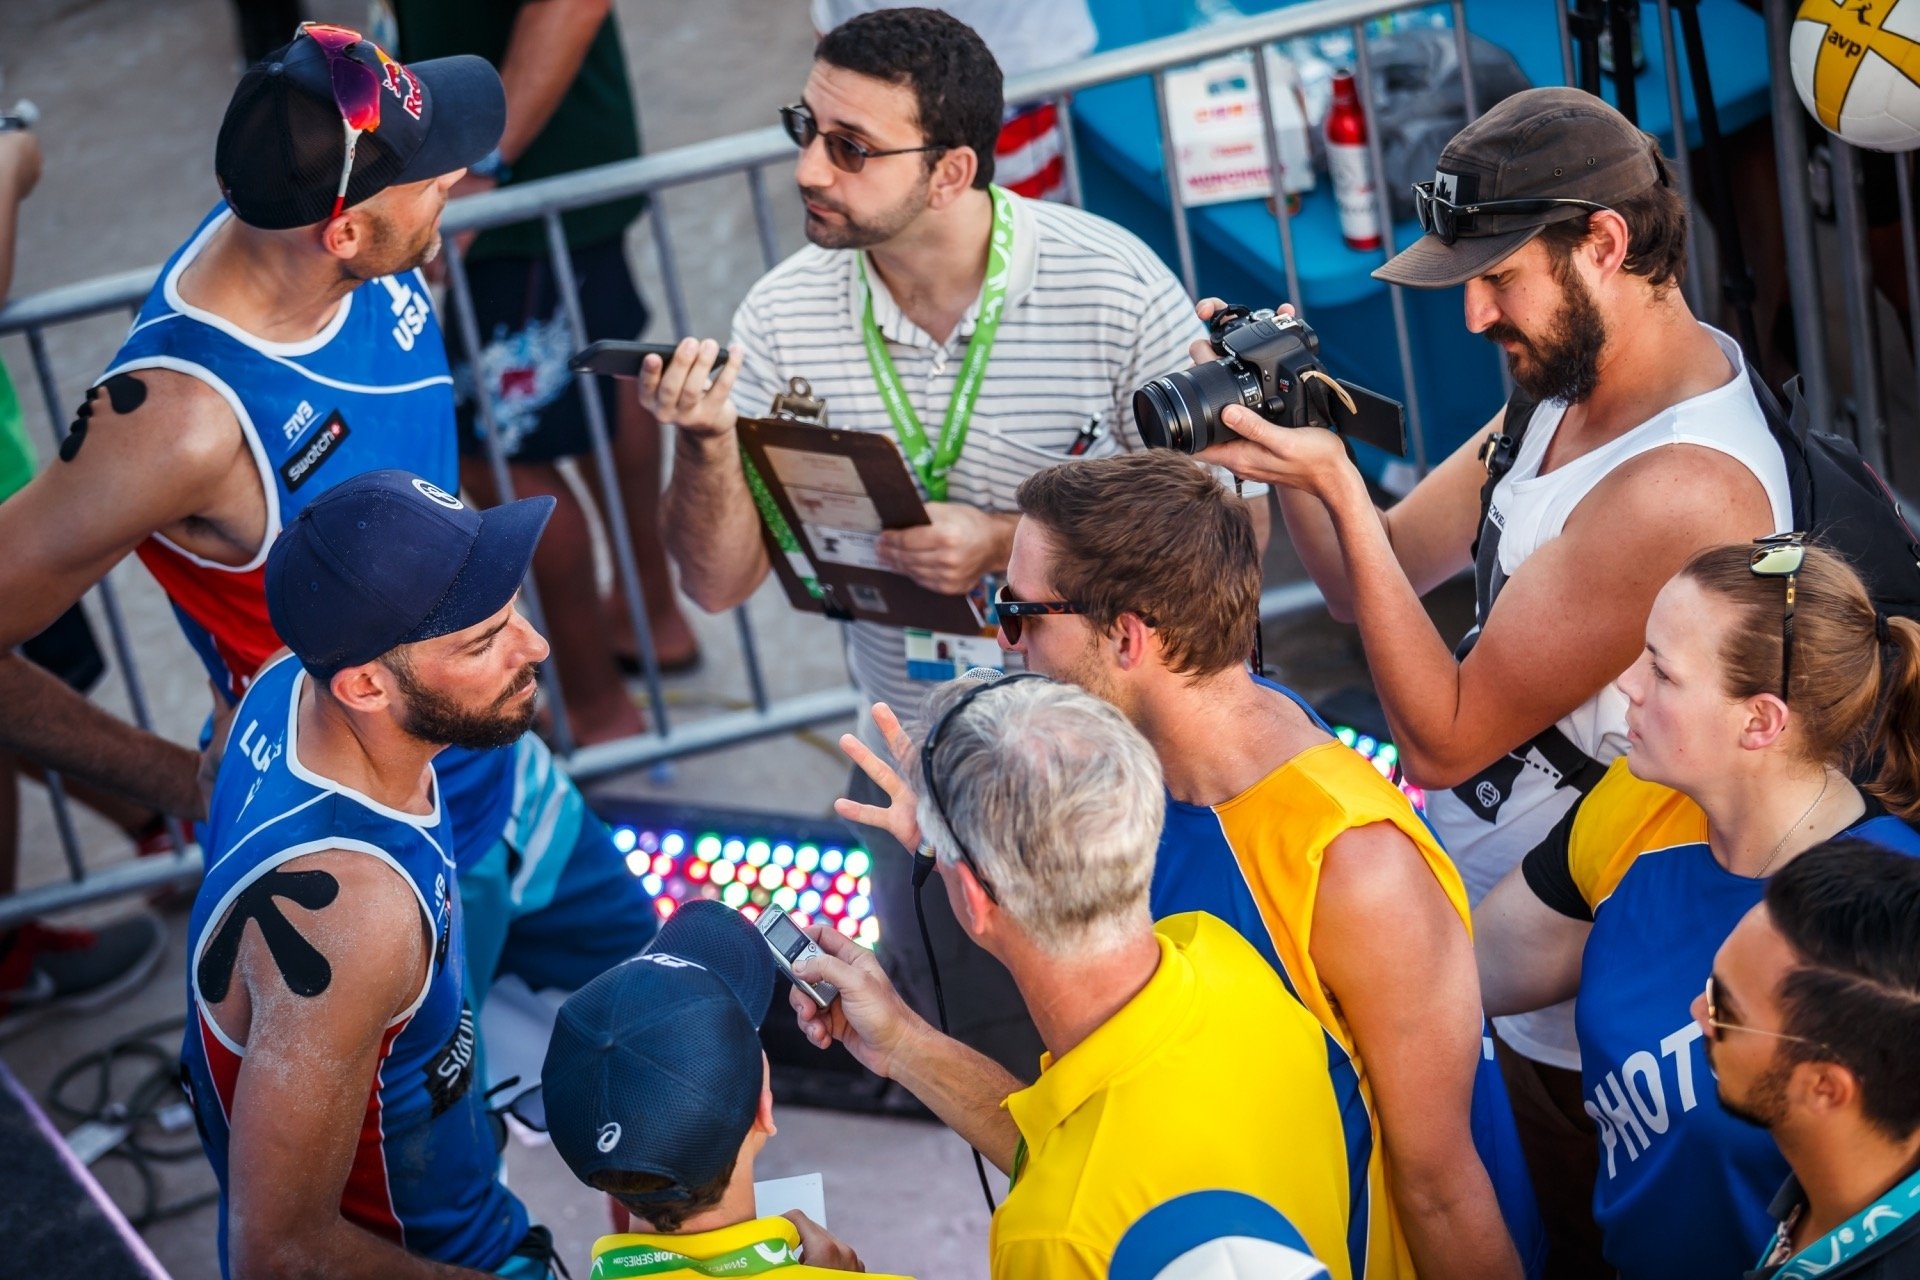 Oh don’t mind me, I’m just here making sure everything runs smoothly with PHIL DALHAUSSER AND NICK LUCENA!!!! Photocredit: Martin Steinthaler